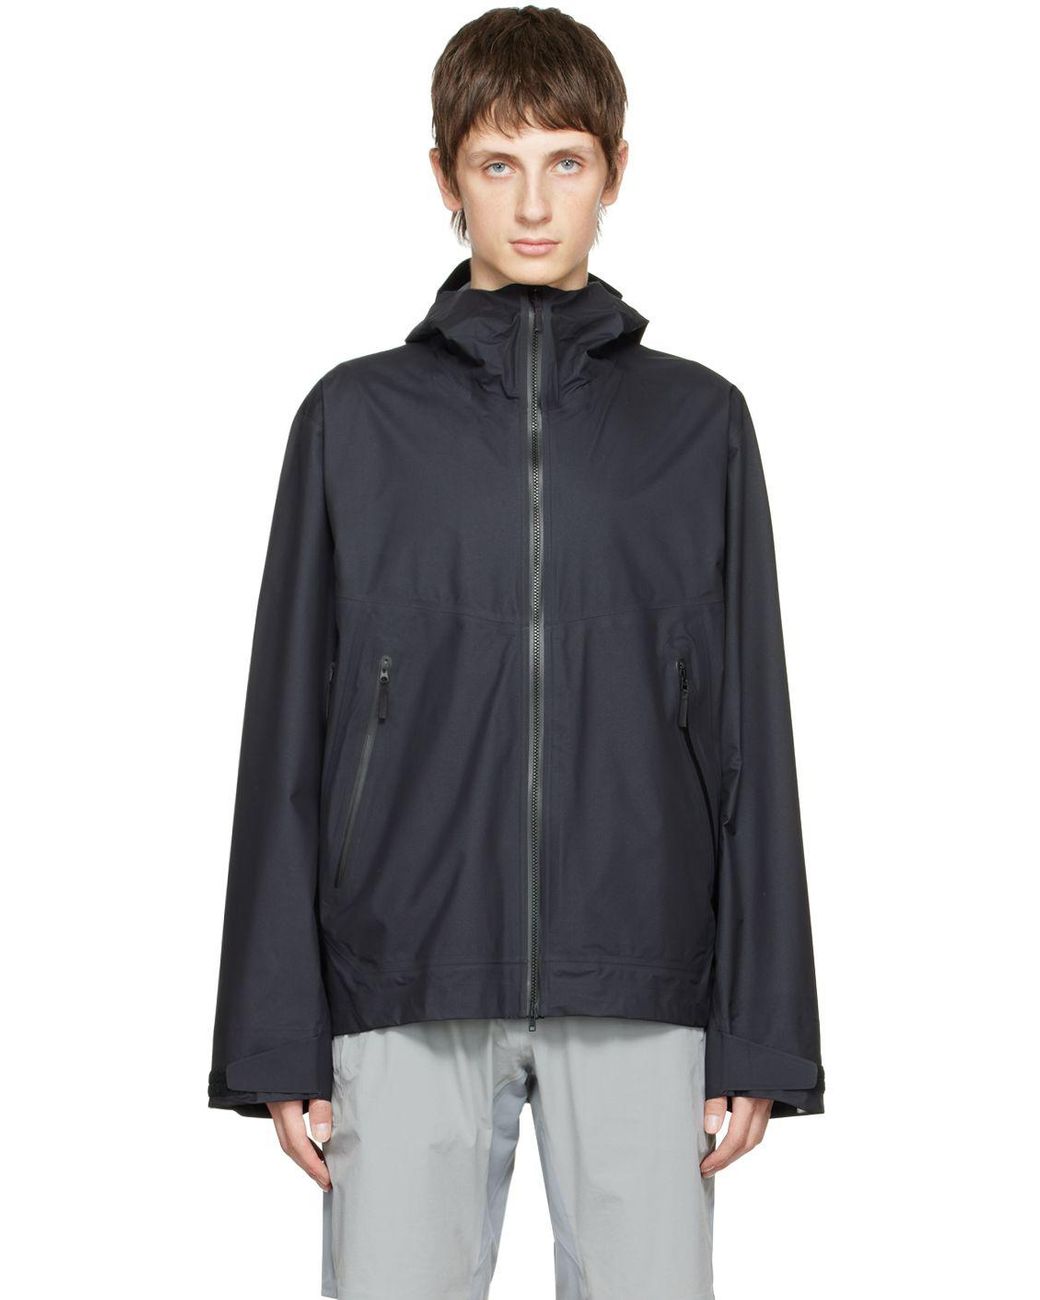 Veilance Synthetic Survey Jacket in Black for Men | Lyst